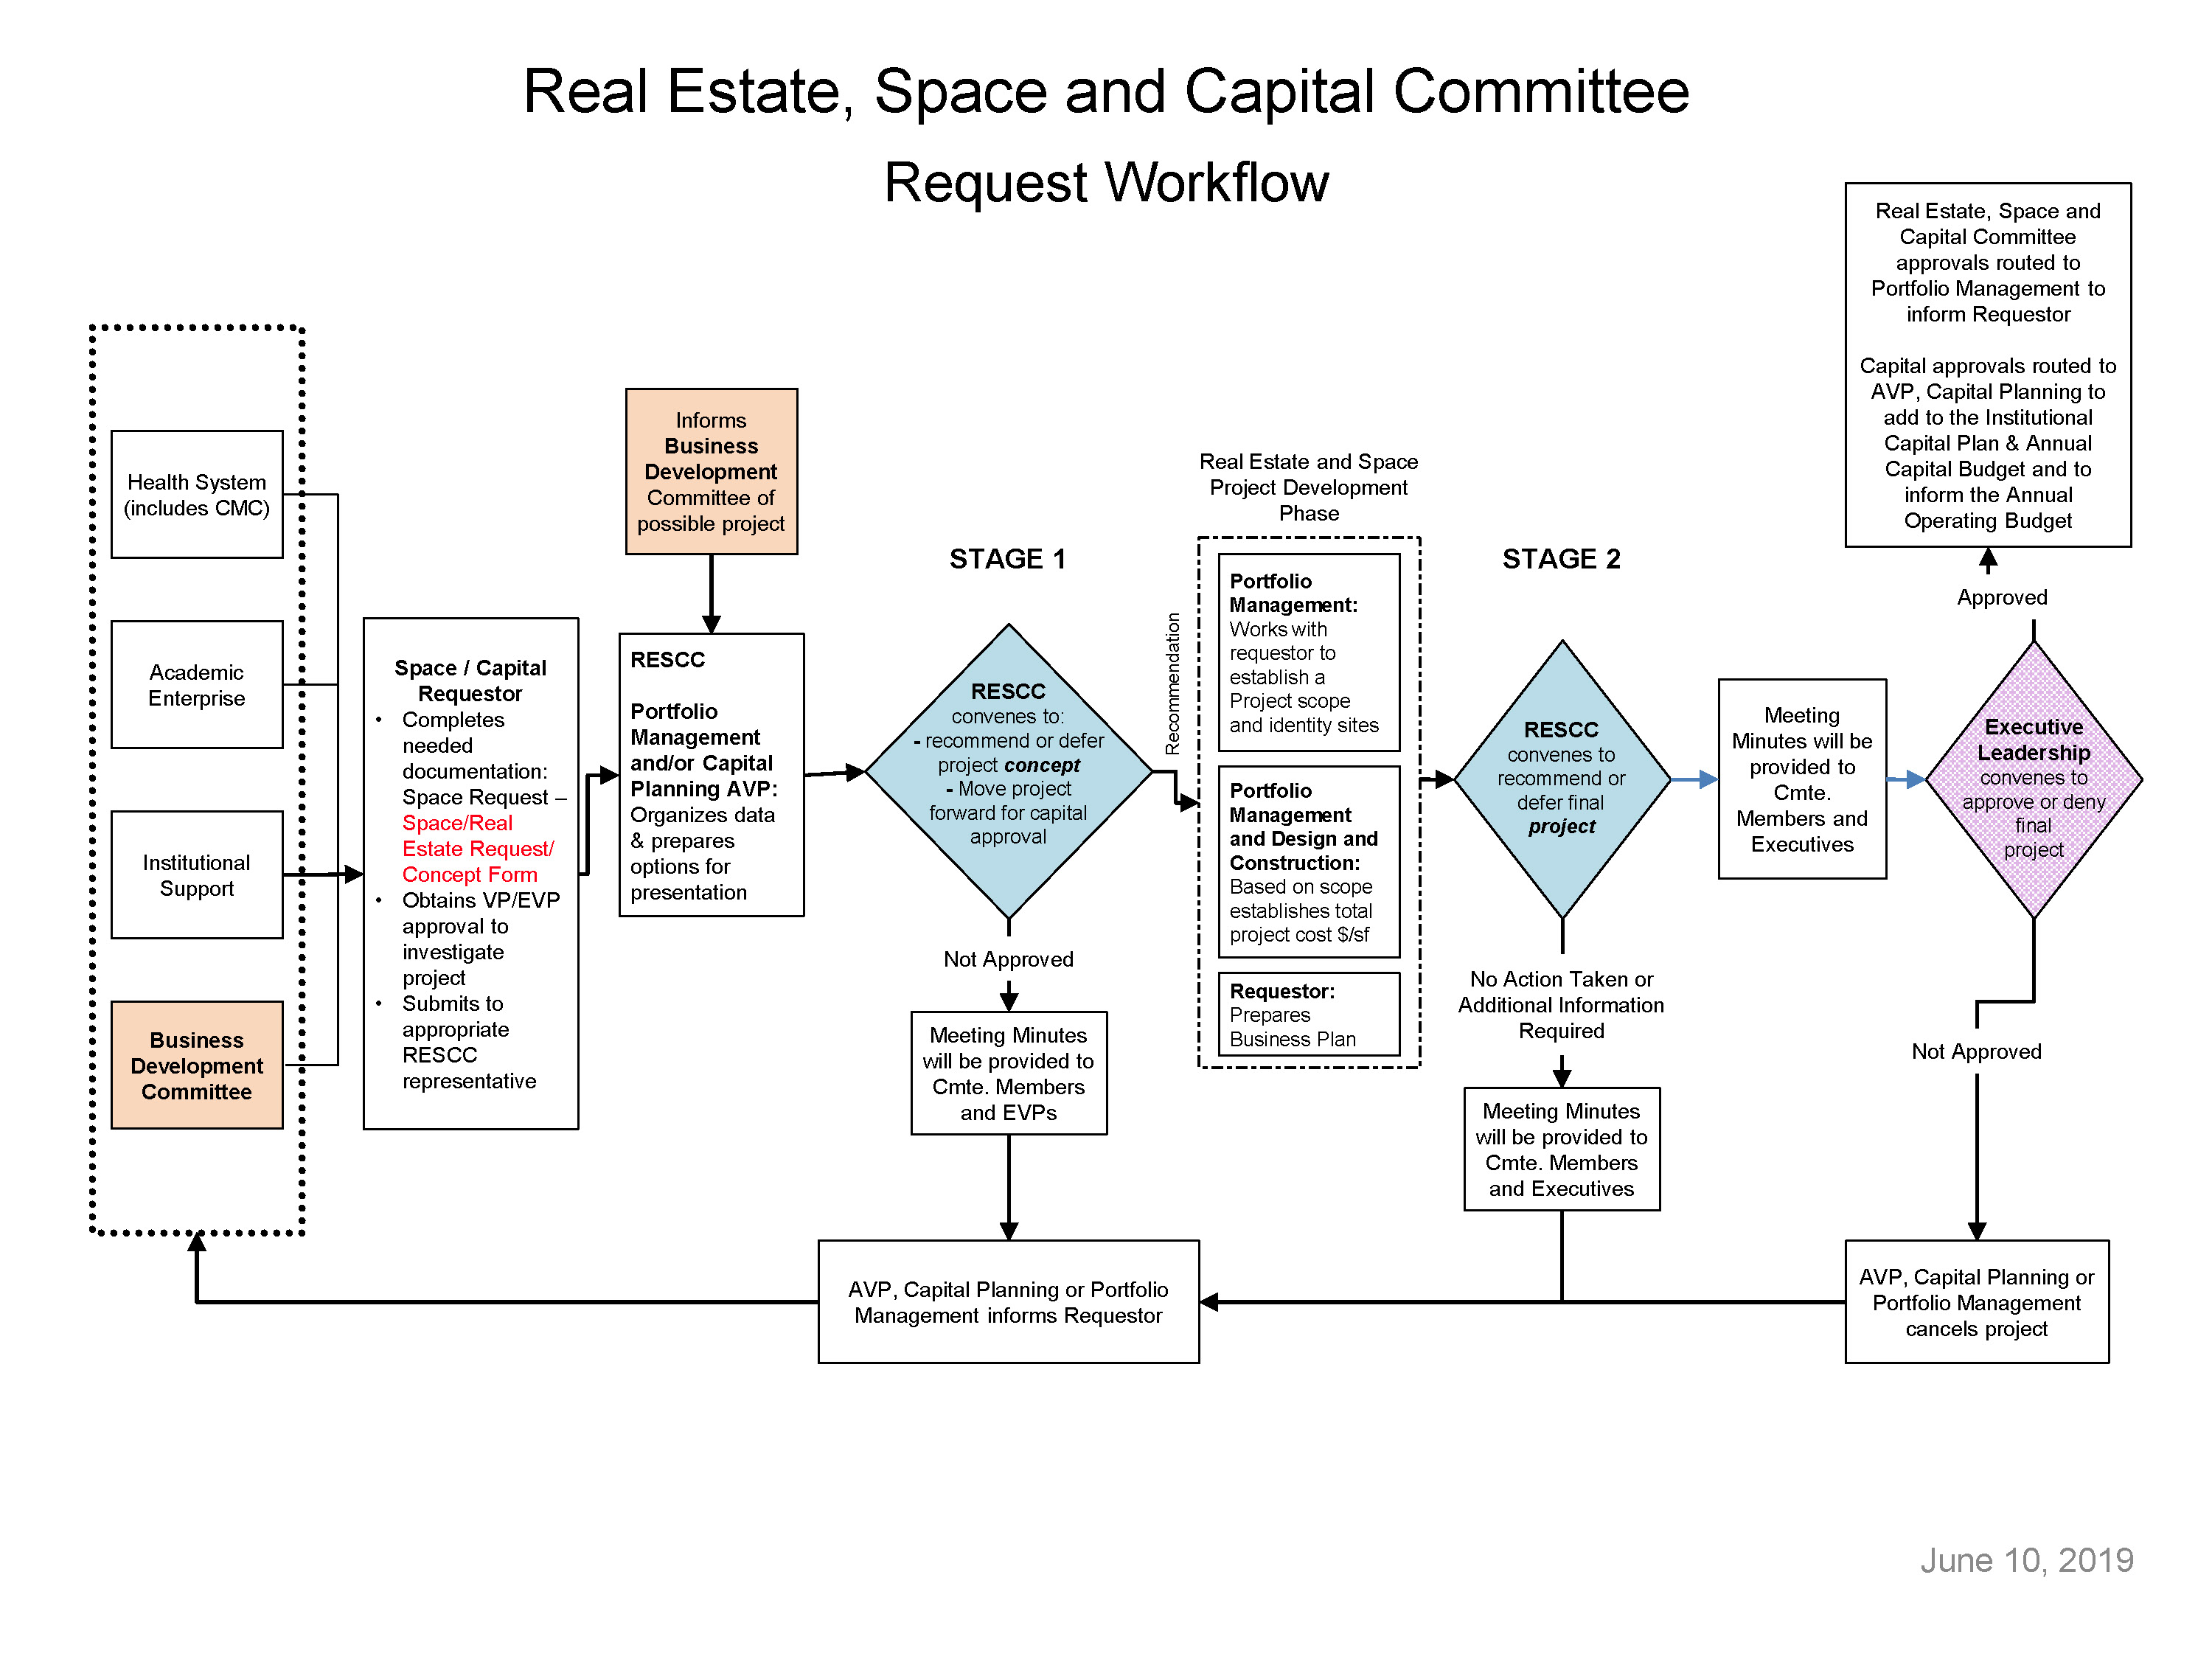 Real Estate Space and Capital Committee Flowchart